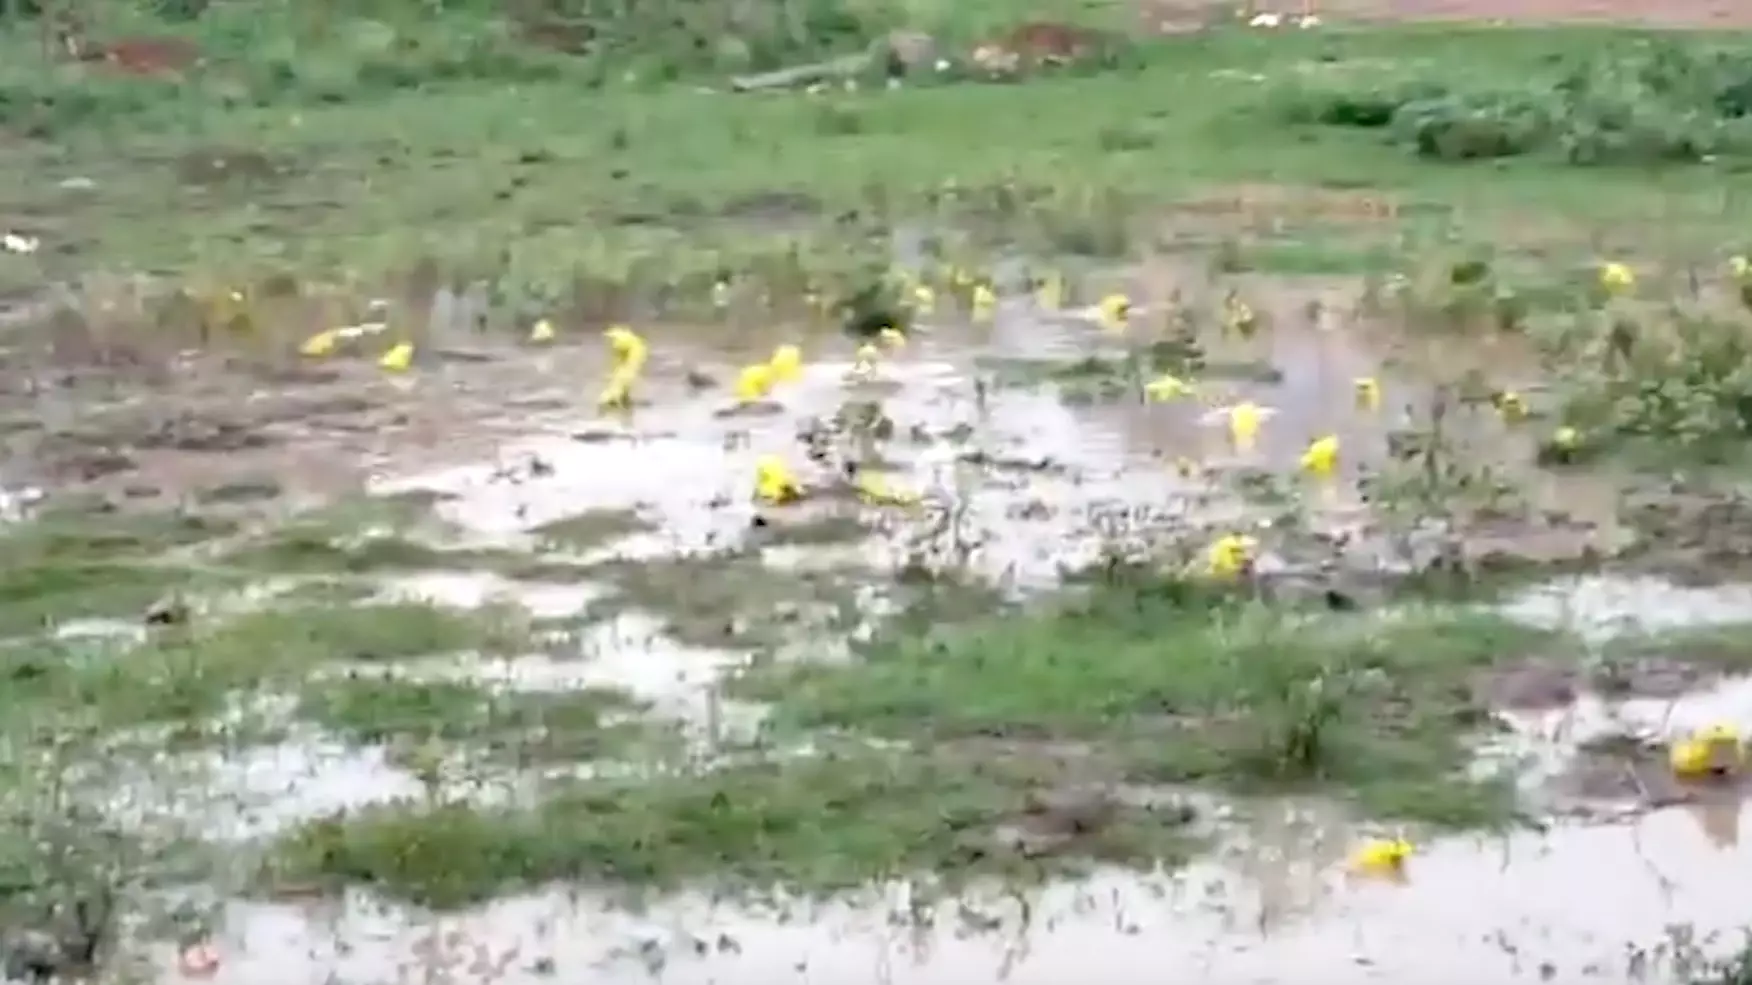 Bright Yellow-Skinned Bullfrogs Emerge In India After Heavy Rainfall 